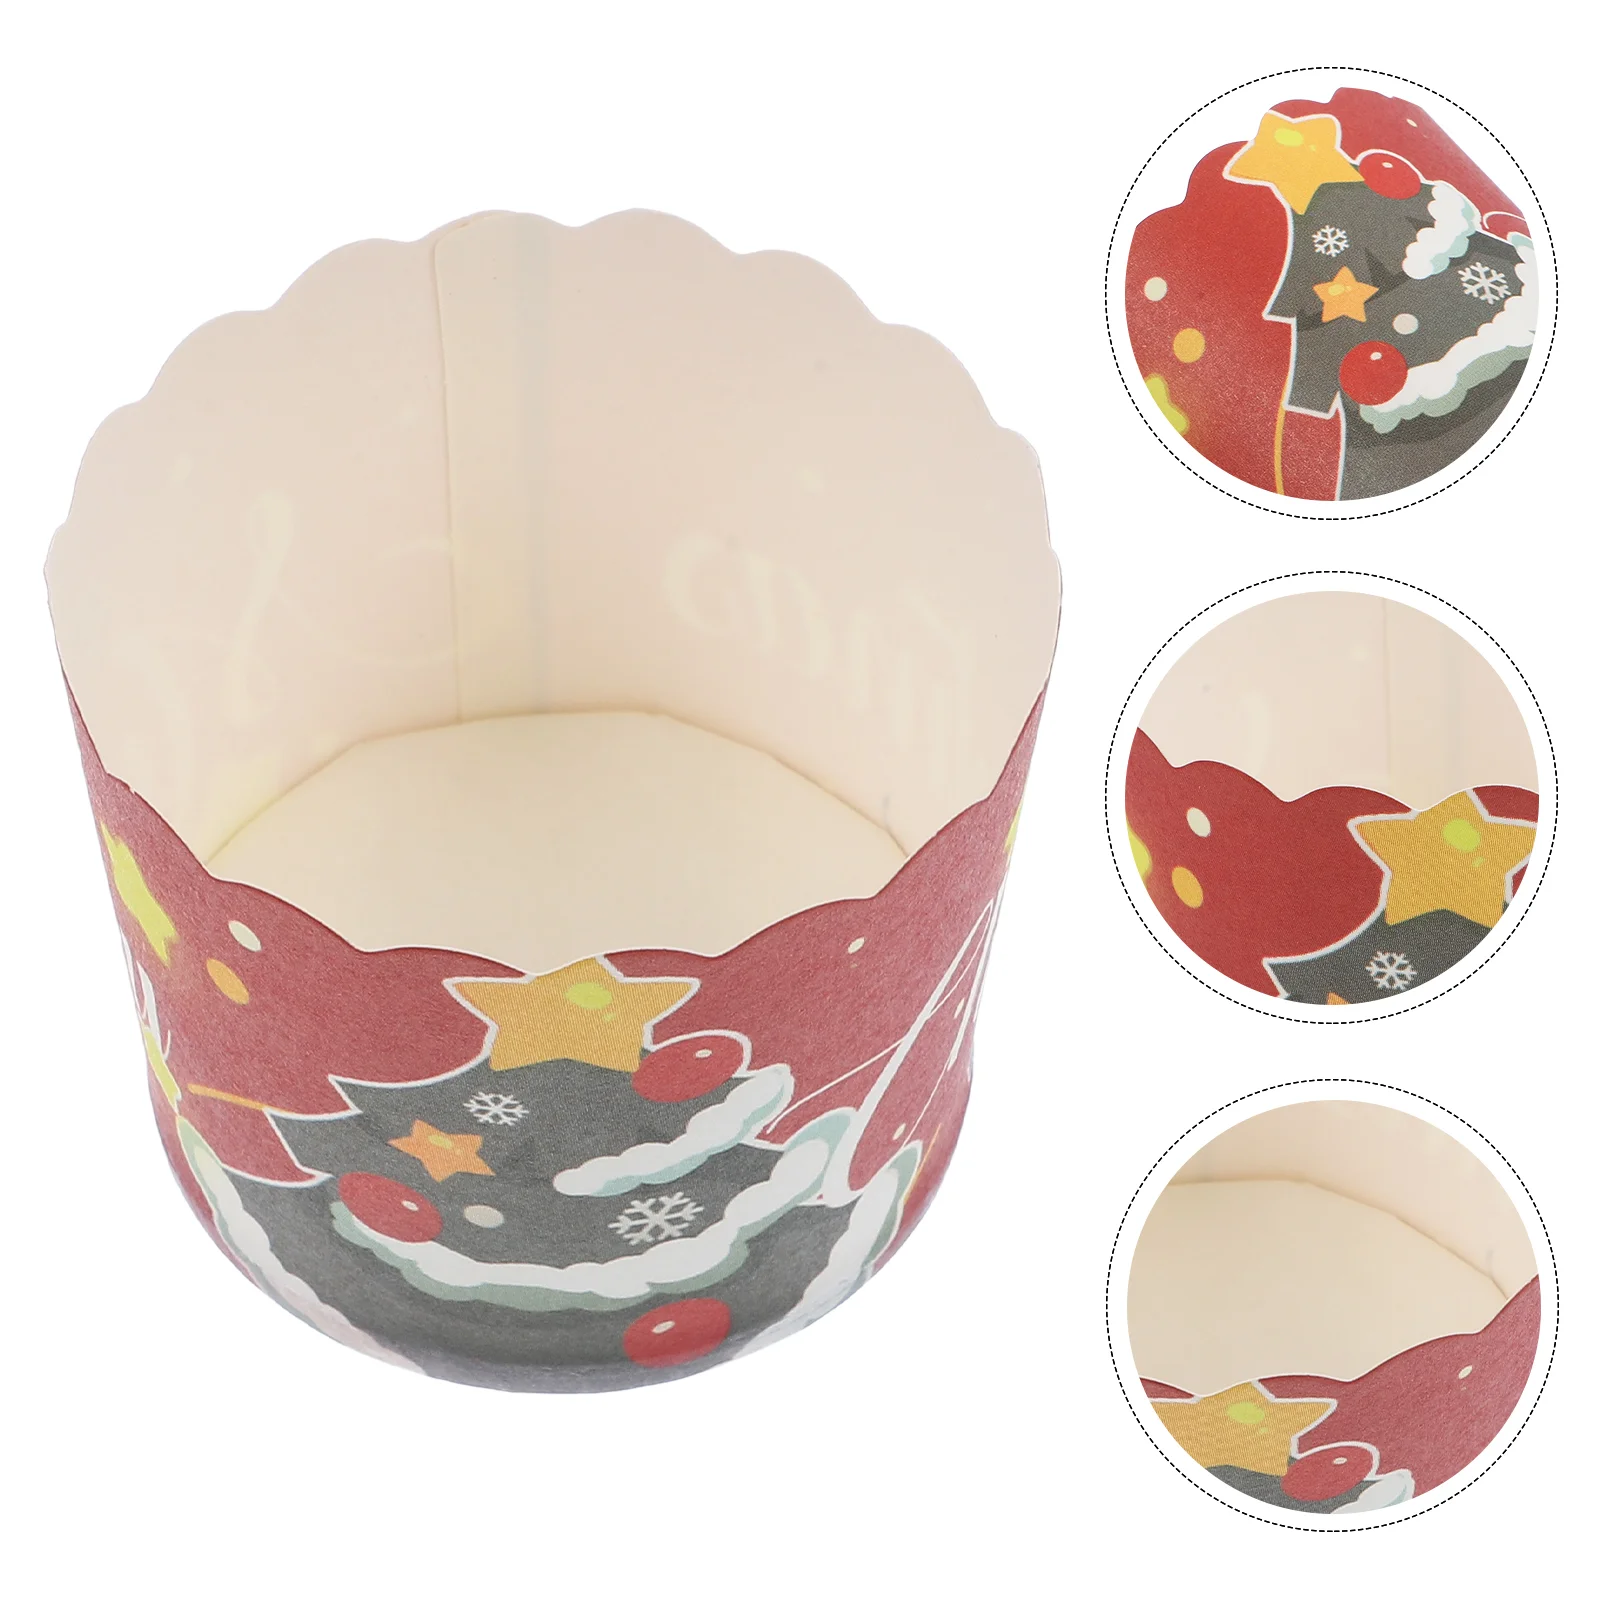 

50Pcs Christmas Themed Cupcake Baking Wrapper Muffin Liners Dessert Baking Cups Xmas Paper Baking Cups